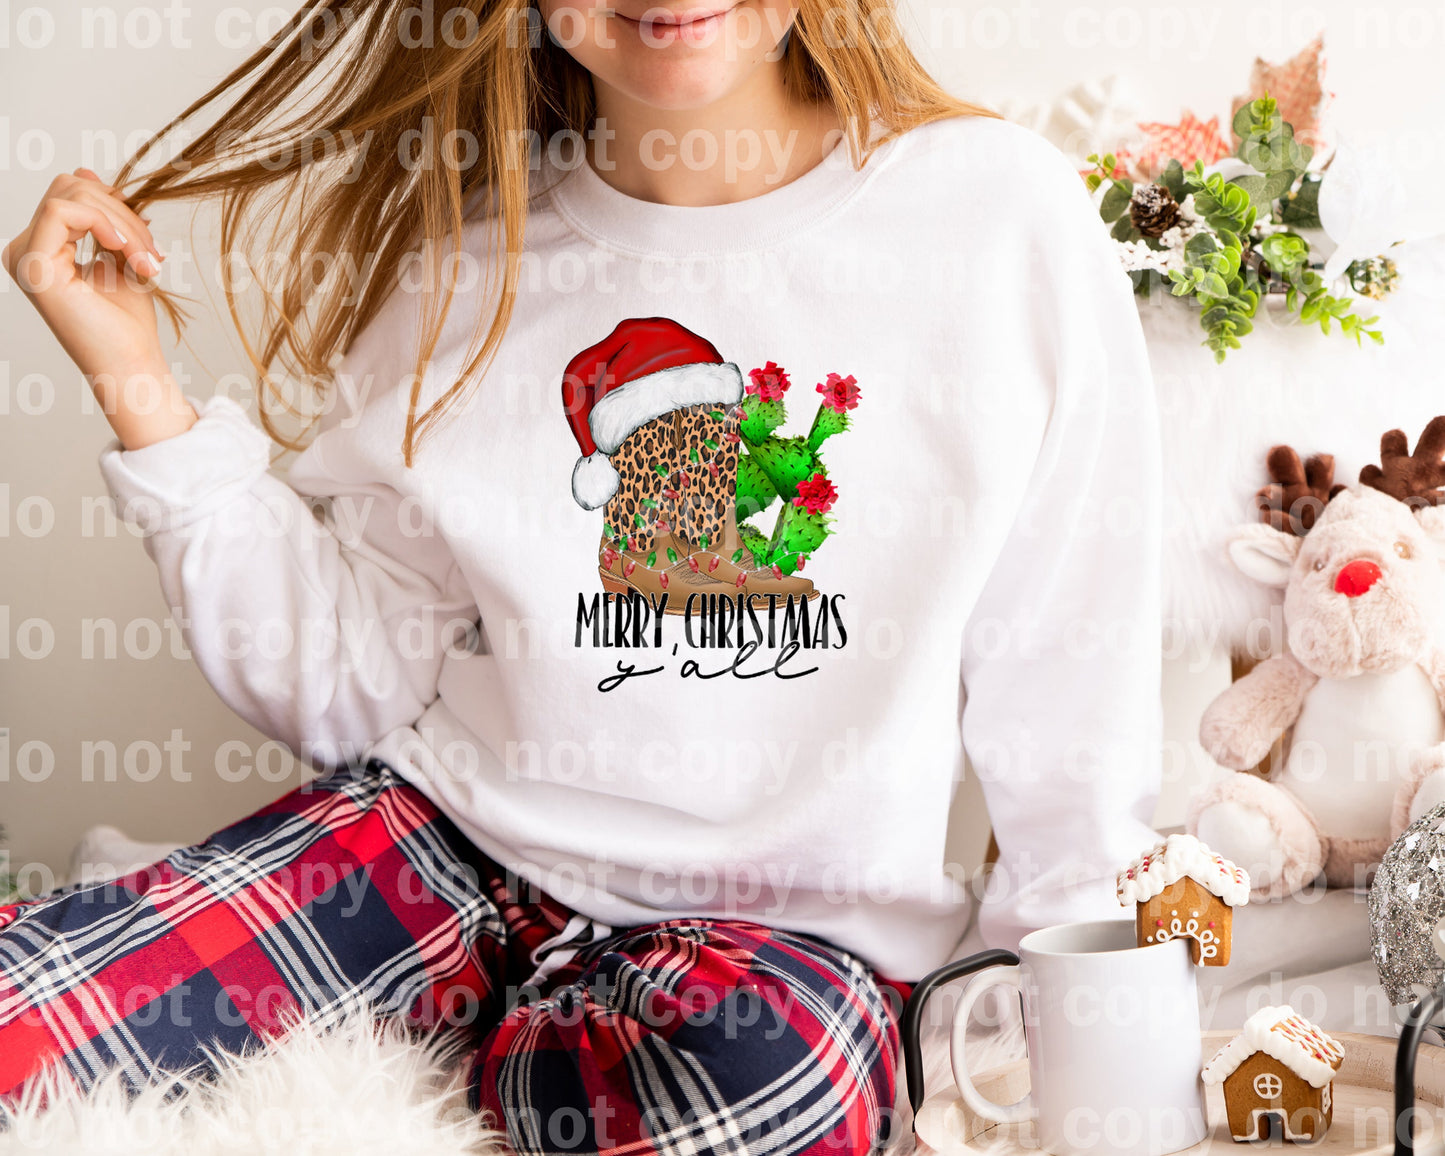 Merry Christmas Y'all Dream Print or Sublimation Print